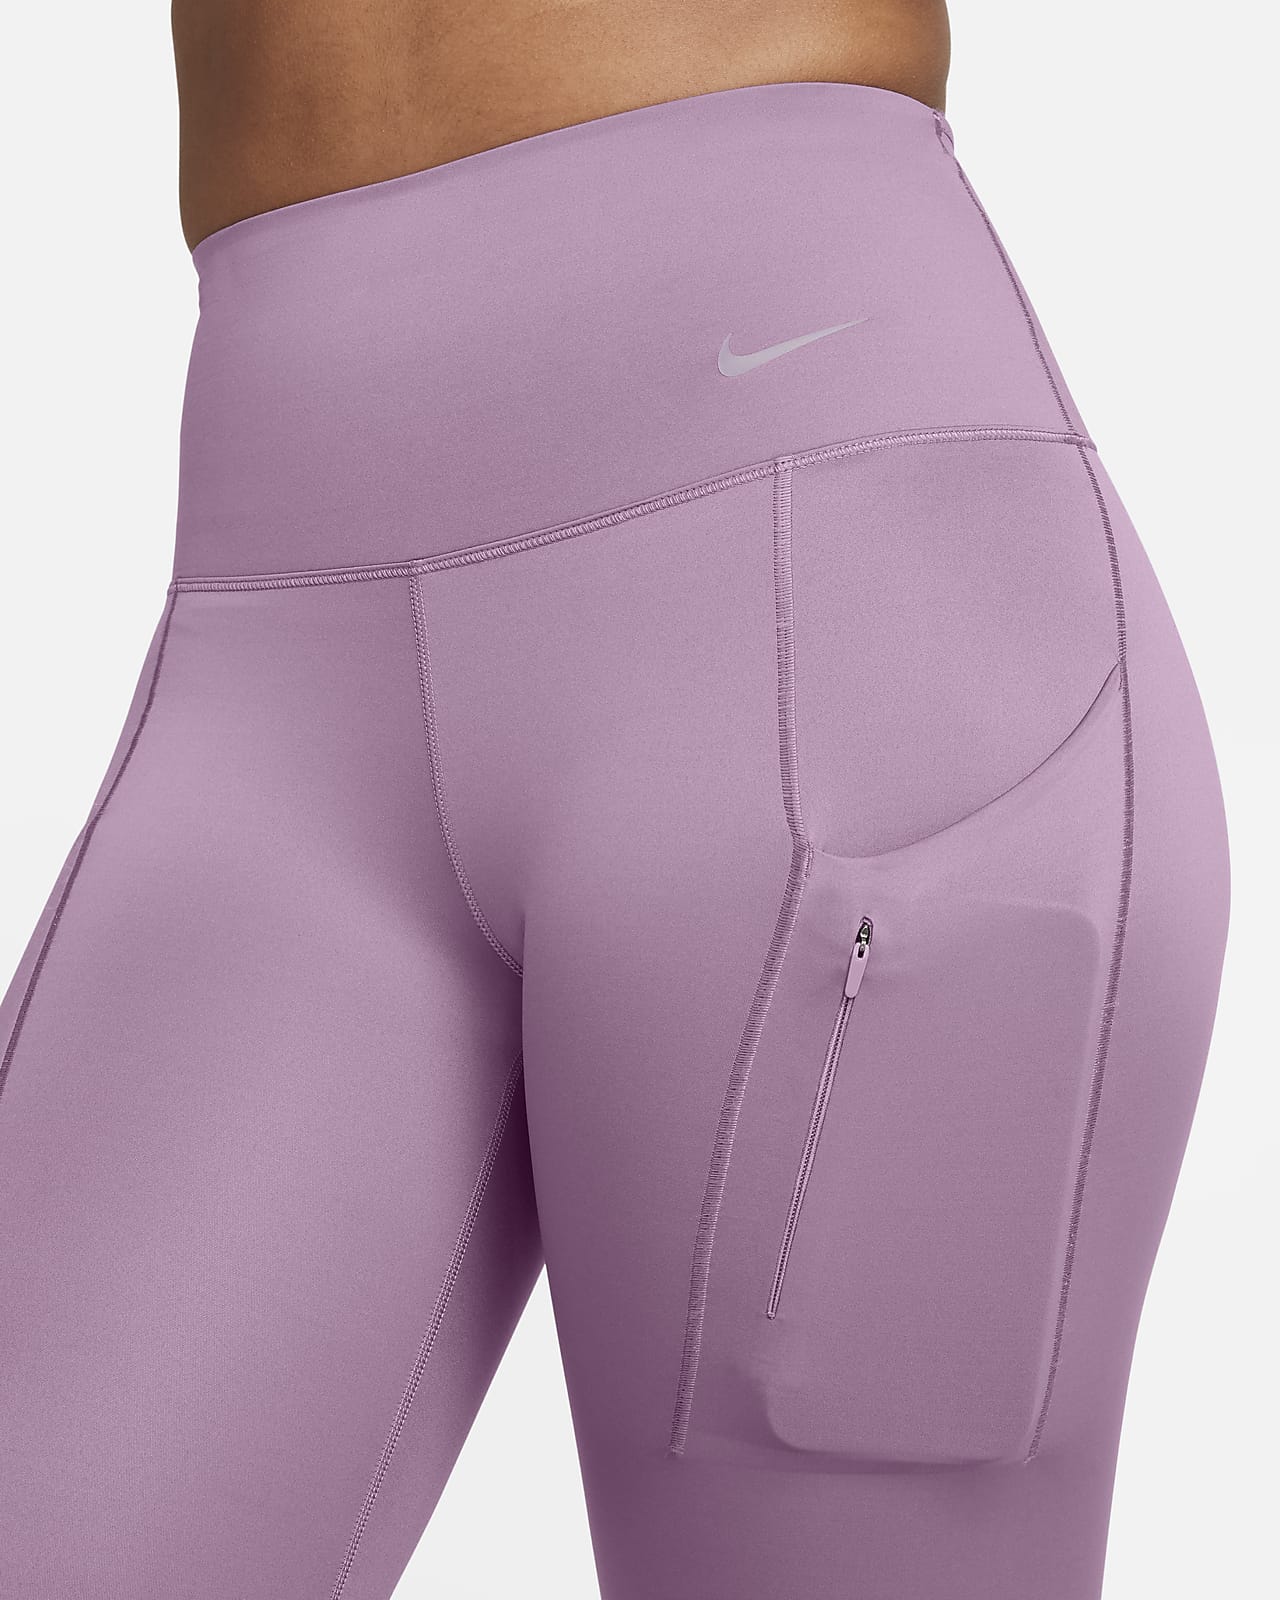 Nike Go Women's Firm-Support High-Waisted 7/8 Leggings with Pockets. Nike